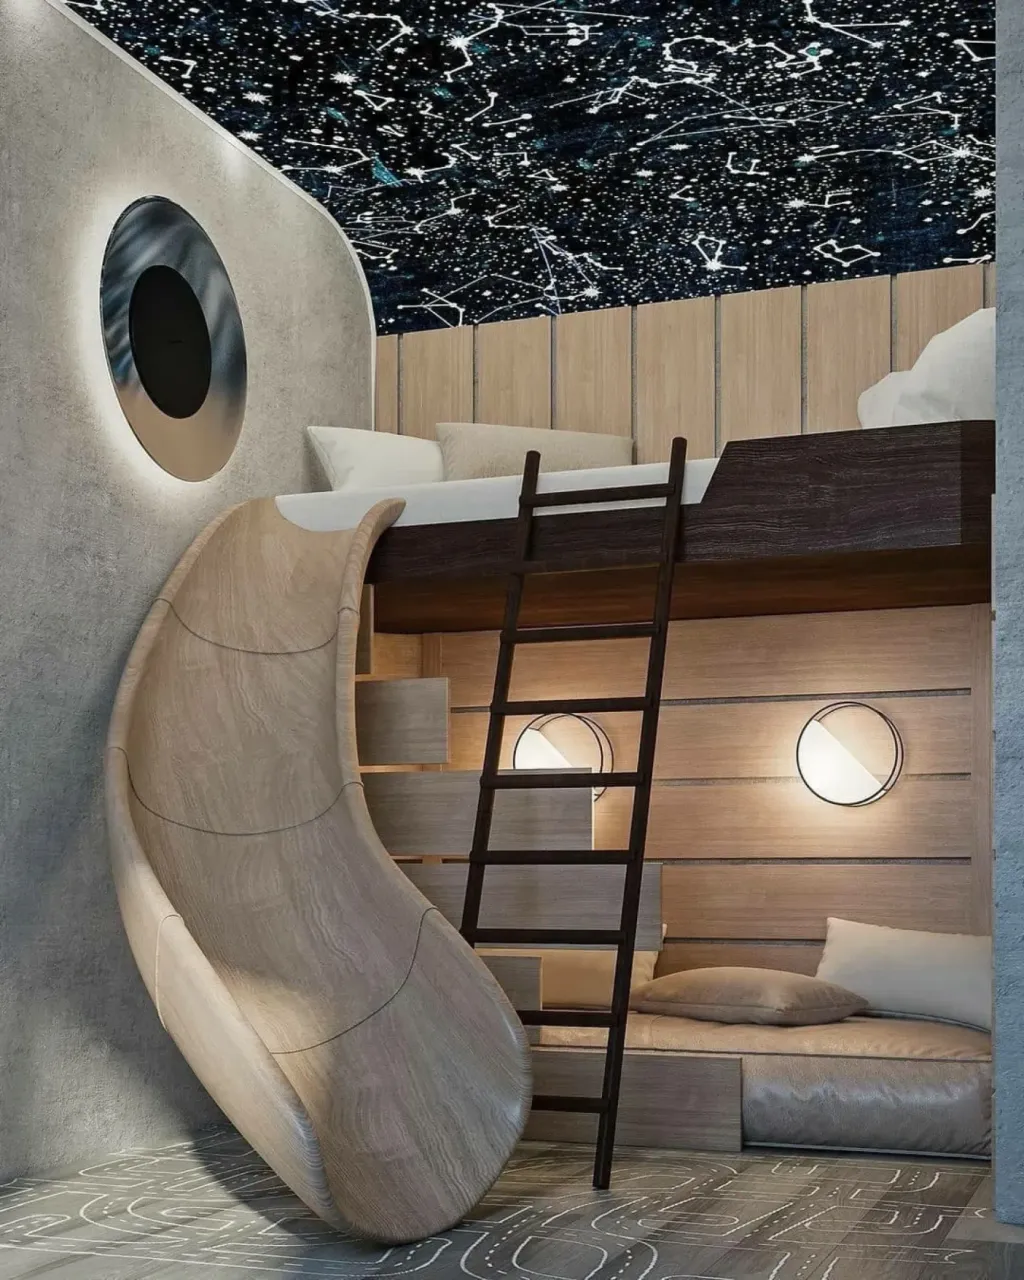 Child room with space theme, slide and round light fixtures